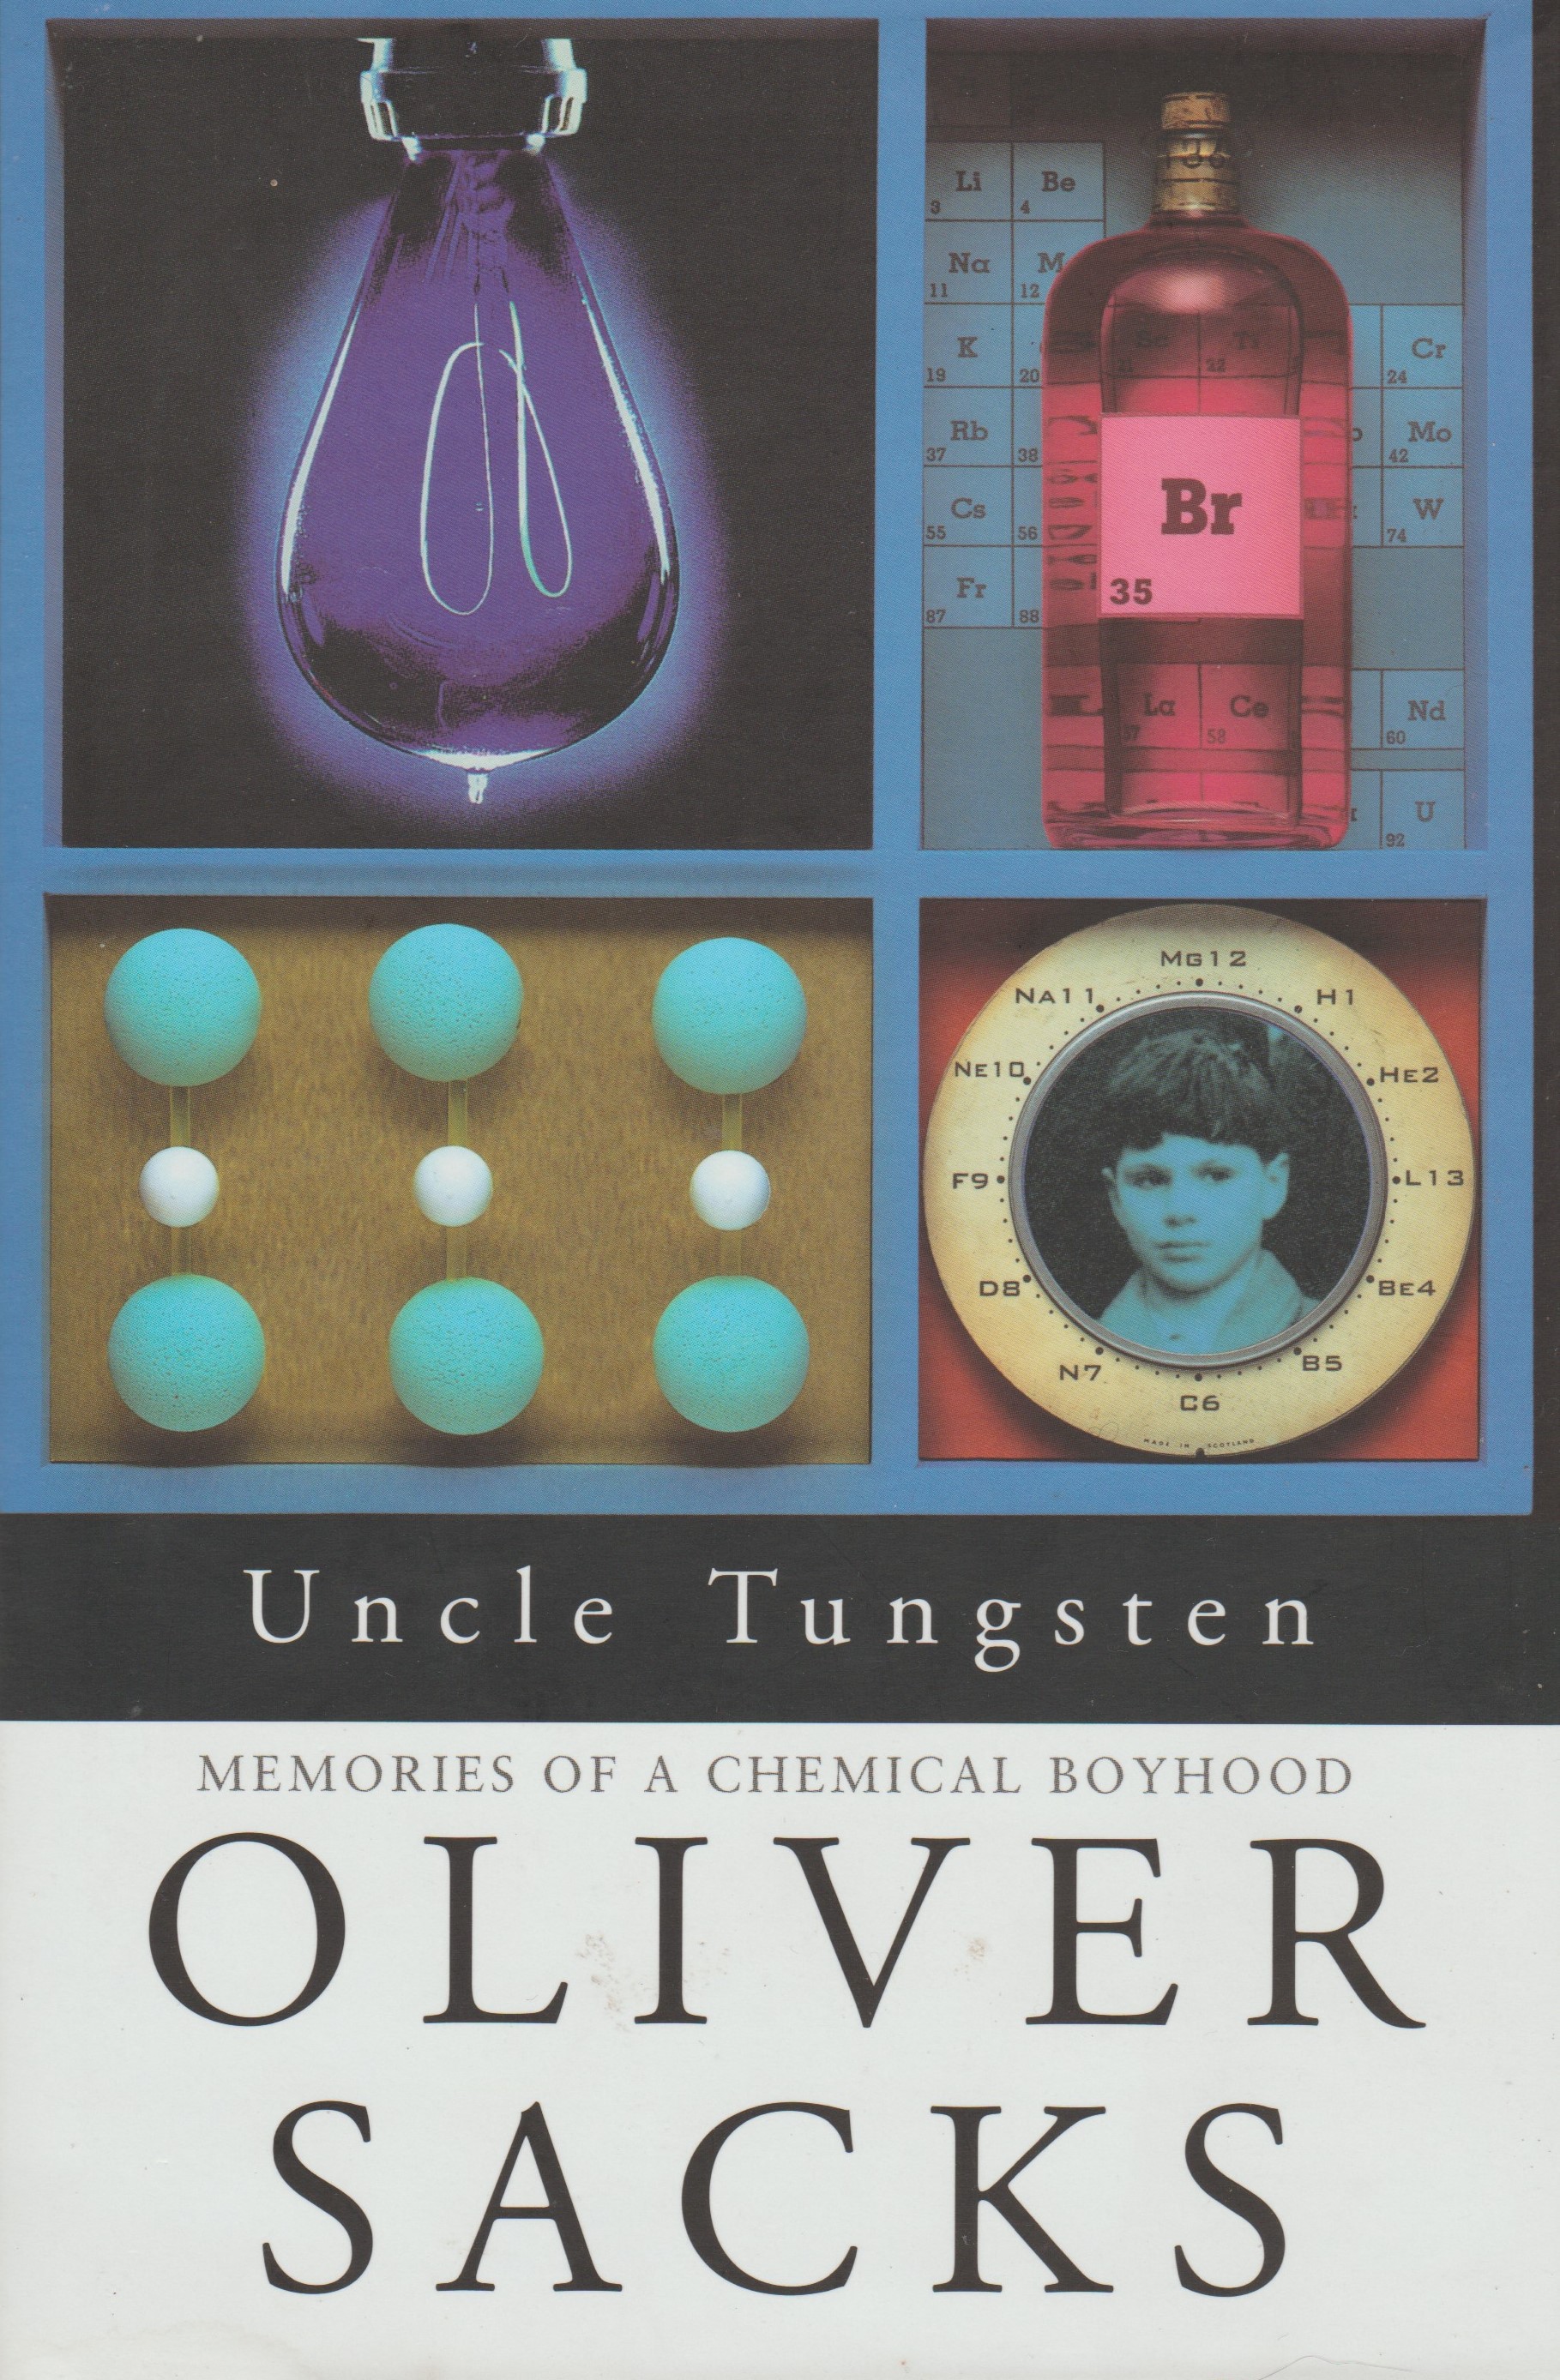 Uncle Tungsten. Memories of a Chemical Boyhood. - Sacks, Oliver.